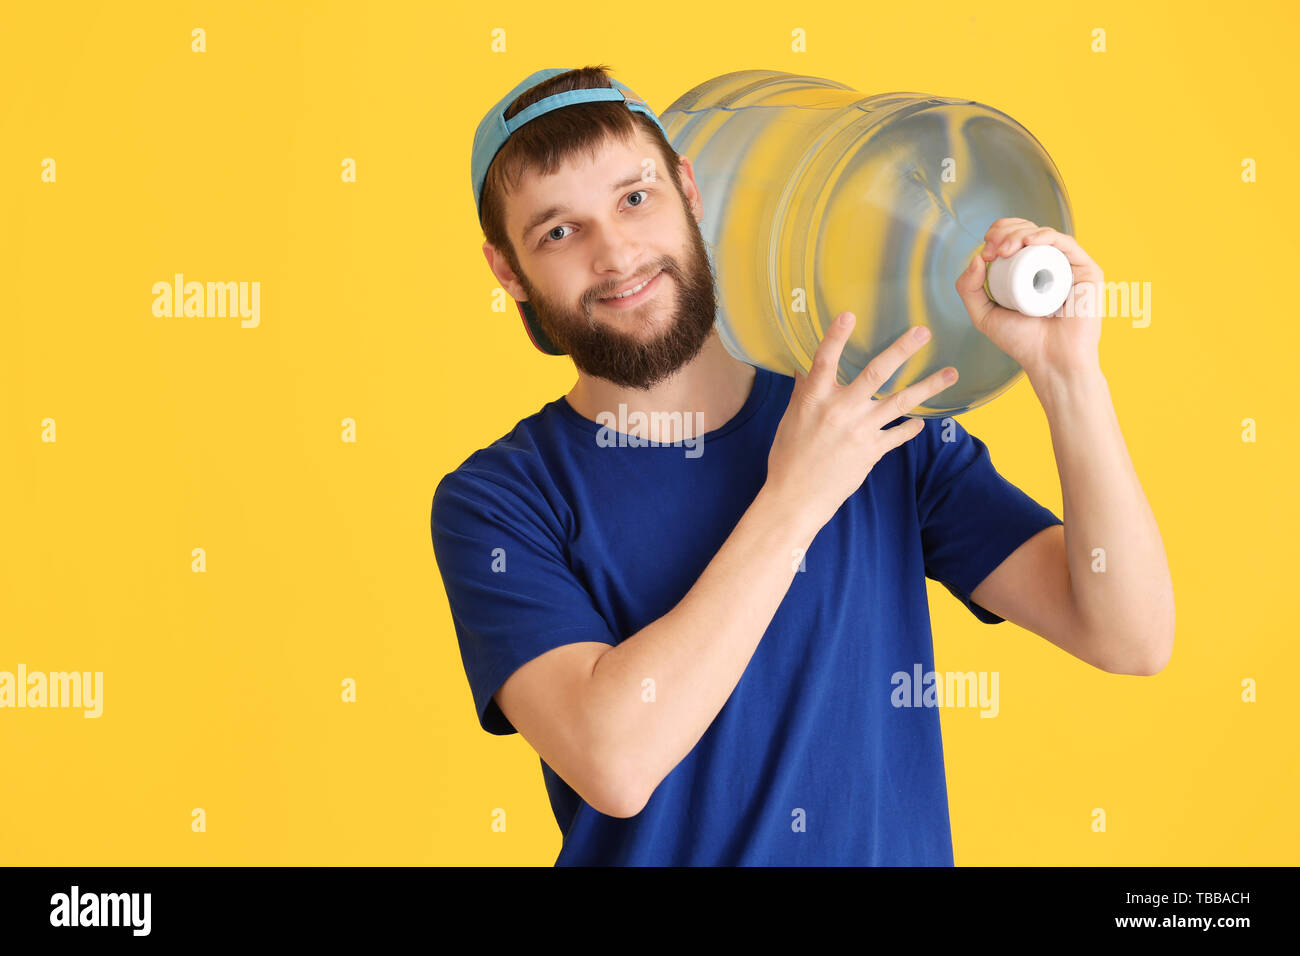 Man with a Giant Water Bottle Stock Image - Image of oversized, exhausted:  128843799